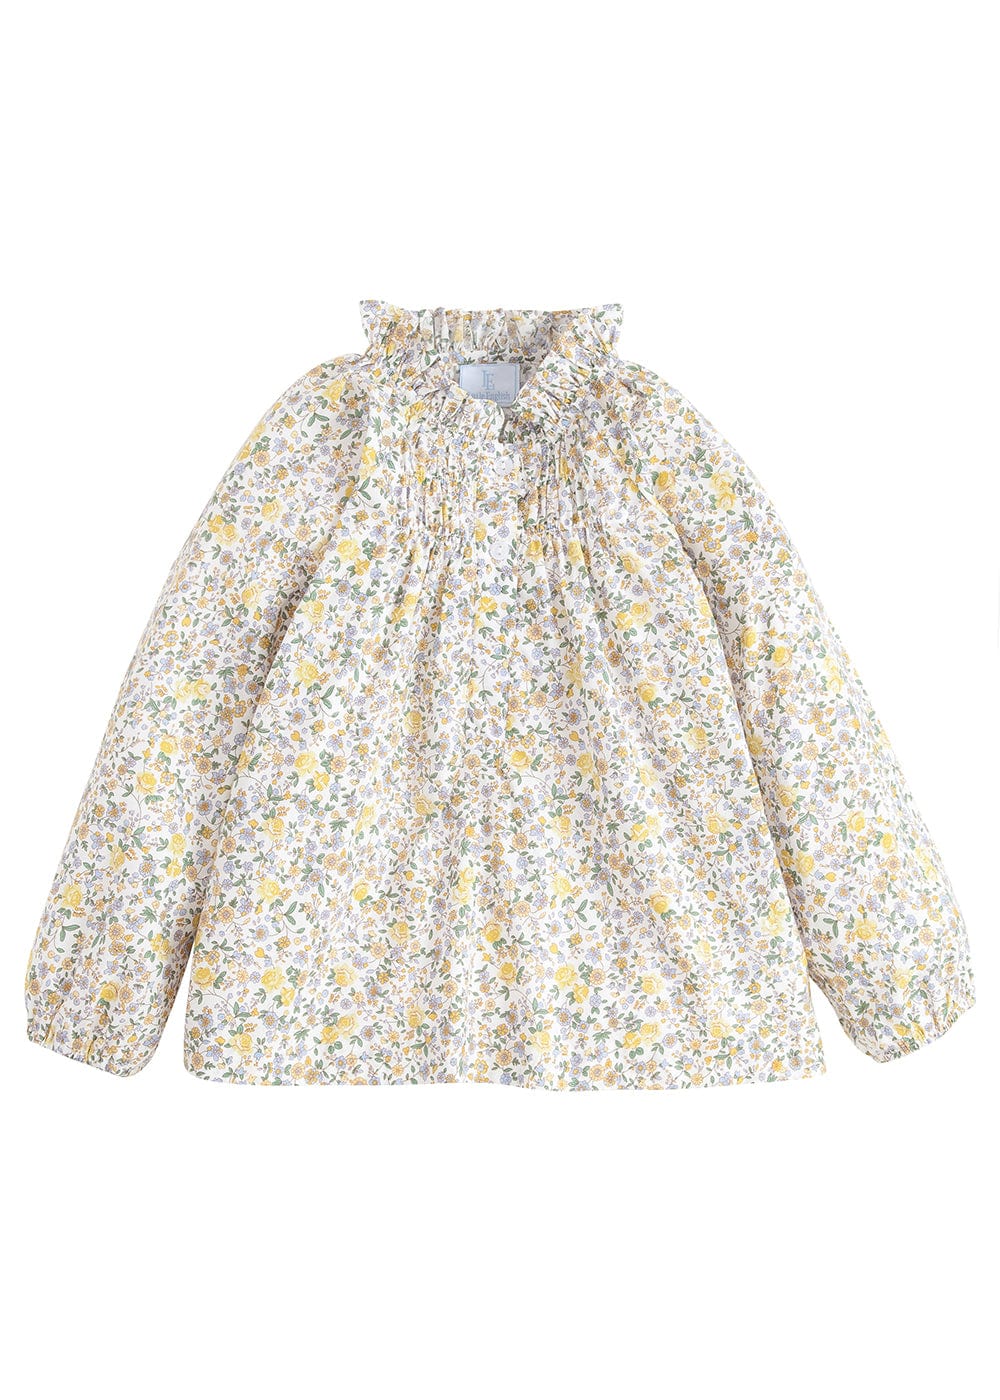 classic childrens clothing girls button up blouse in beige and yellow flowers with ruffles around neck and cinching at chest